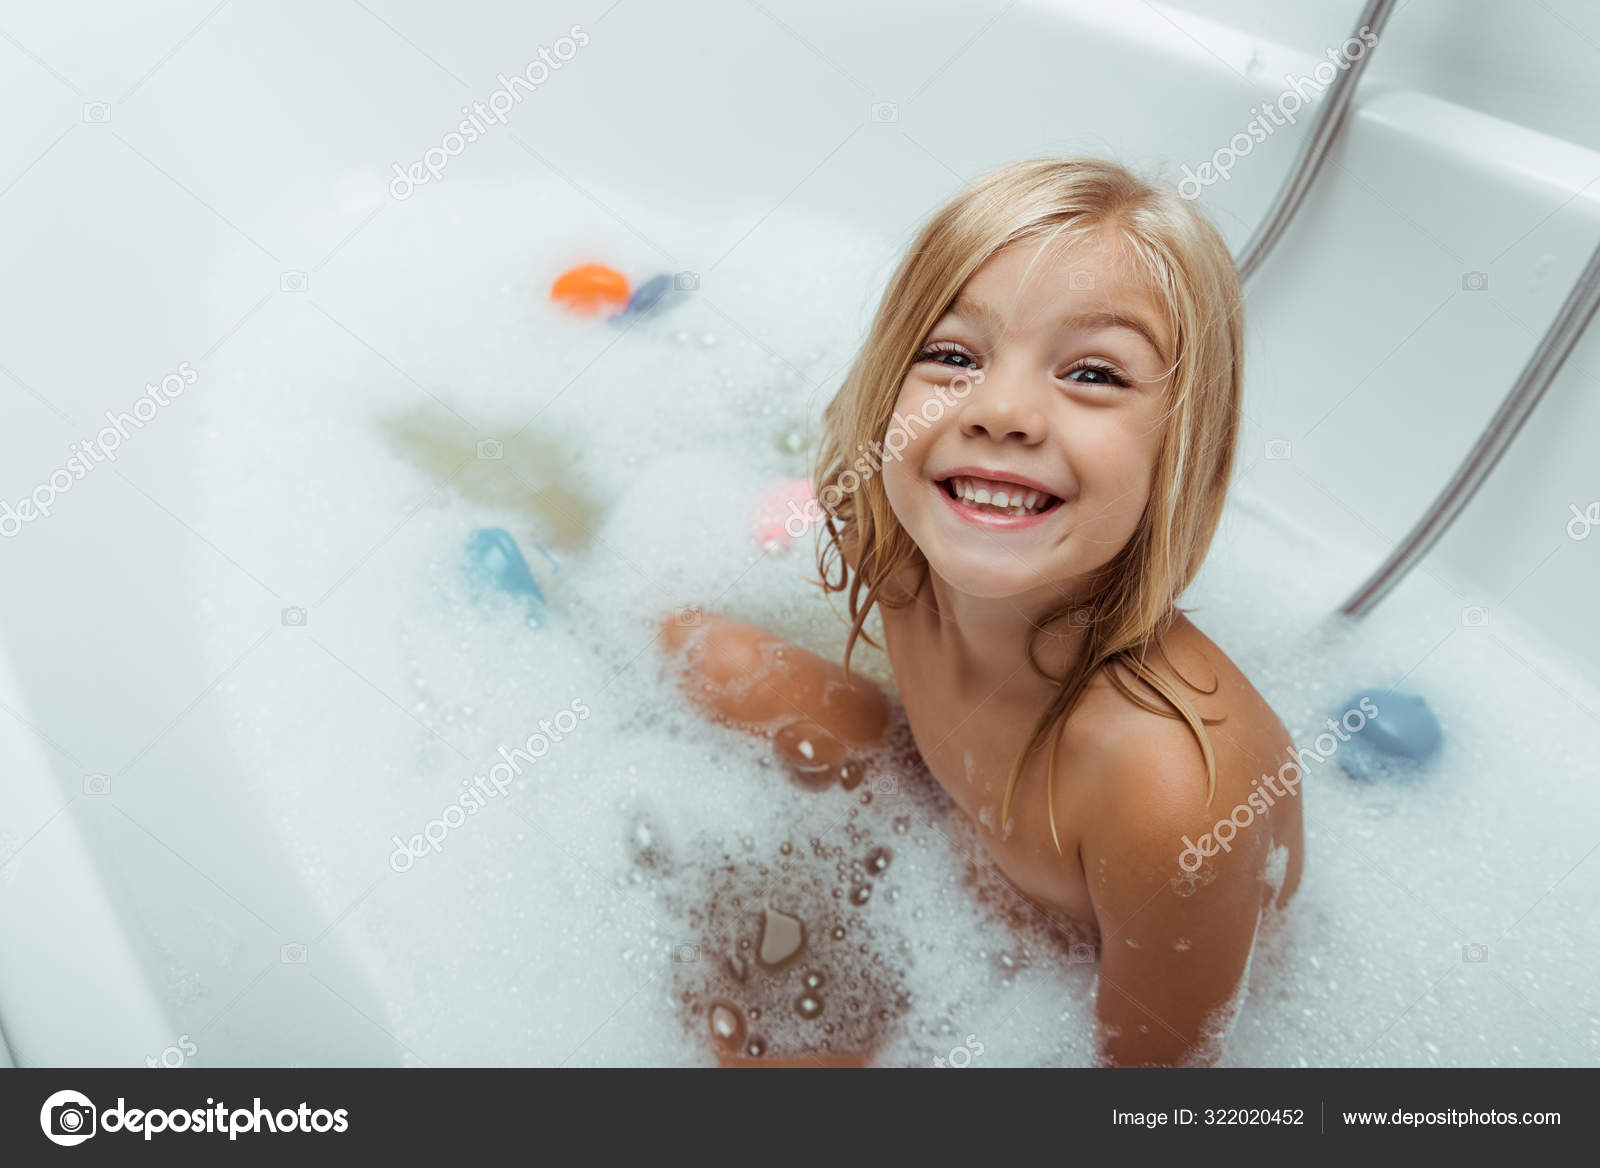 baby naked bath Naked baby sitting in bathtub, looking … – License image ...